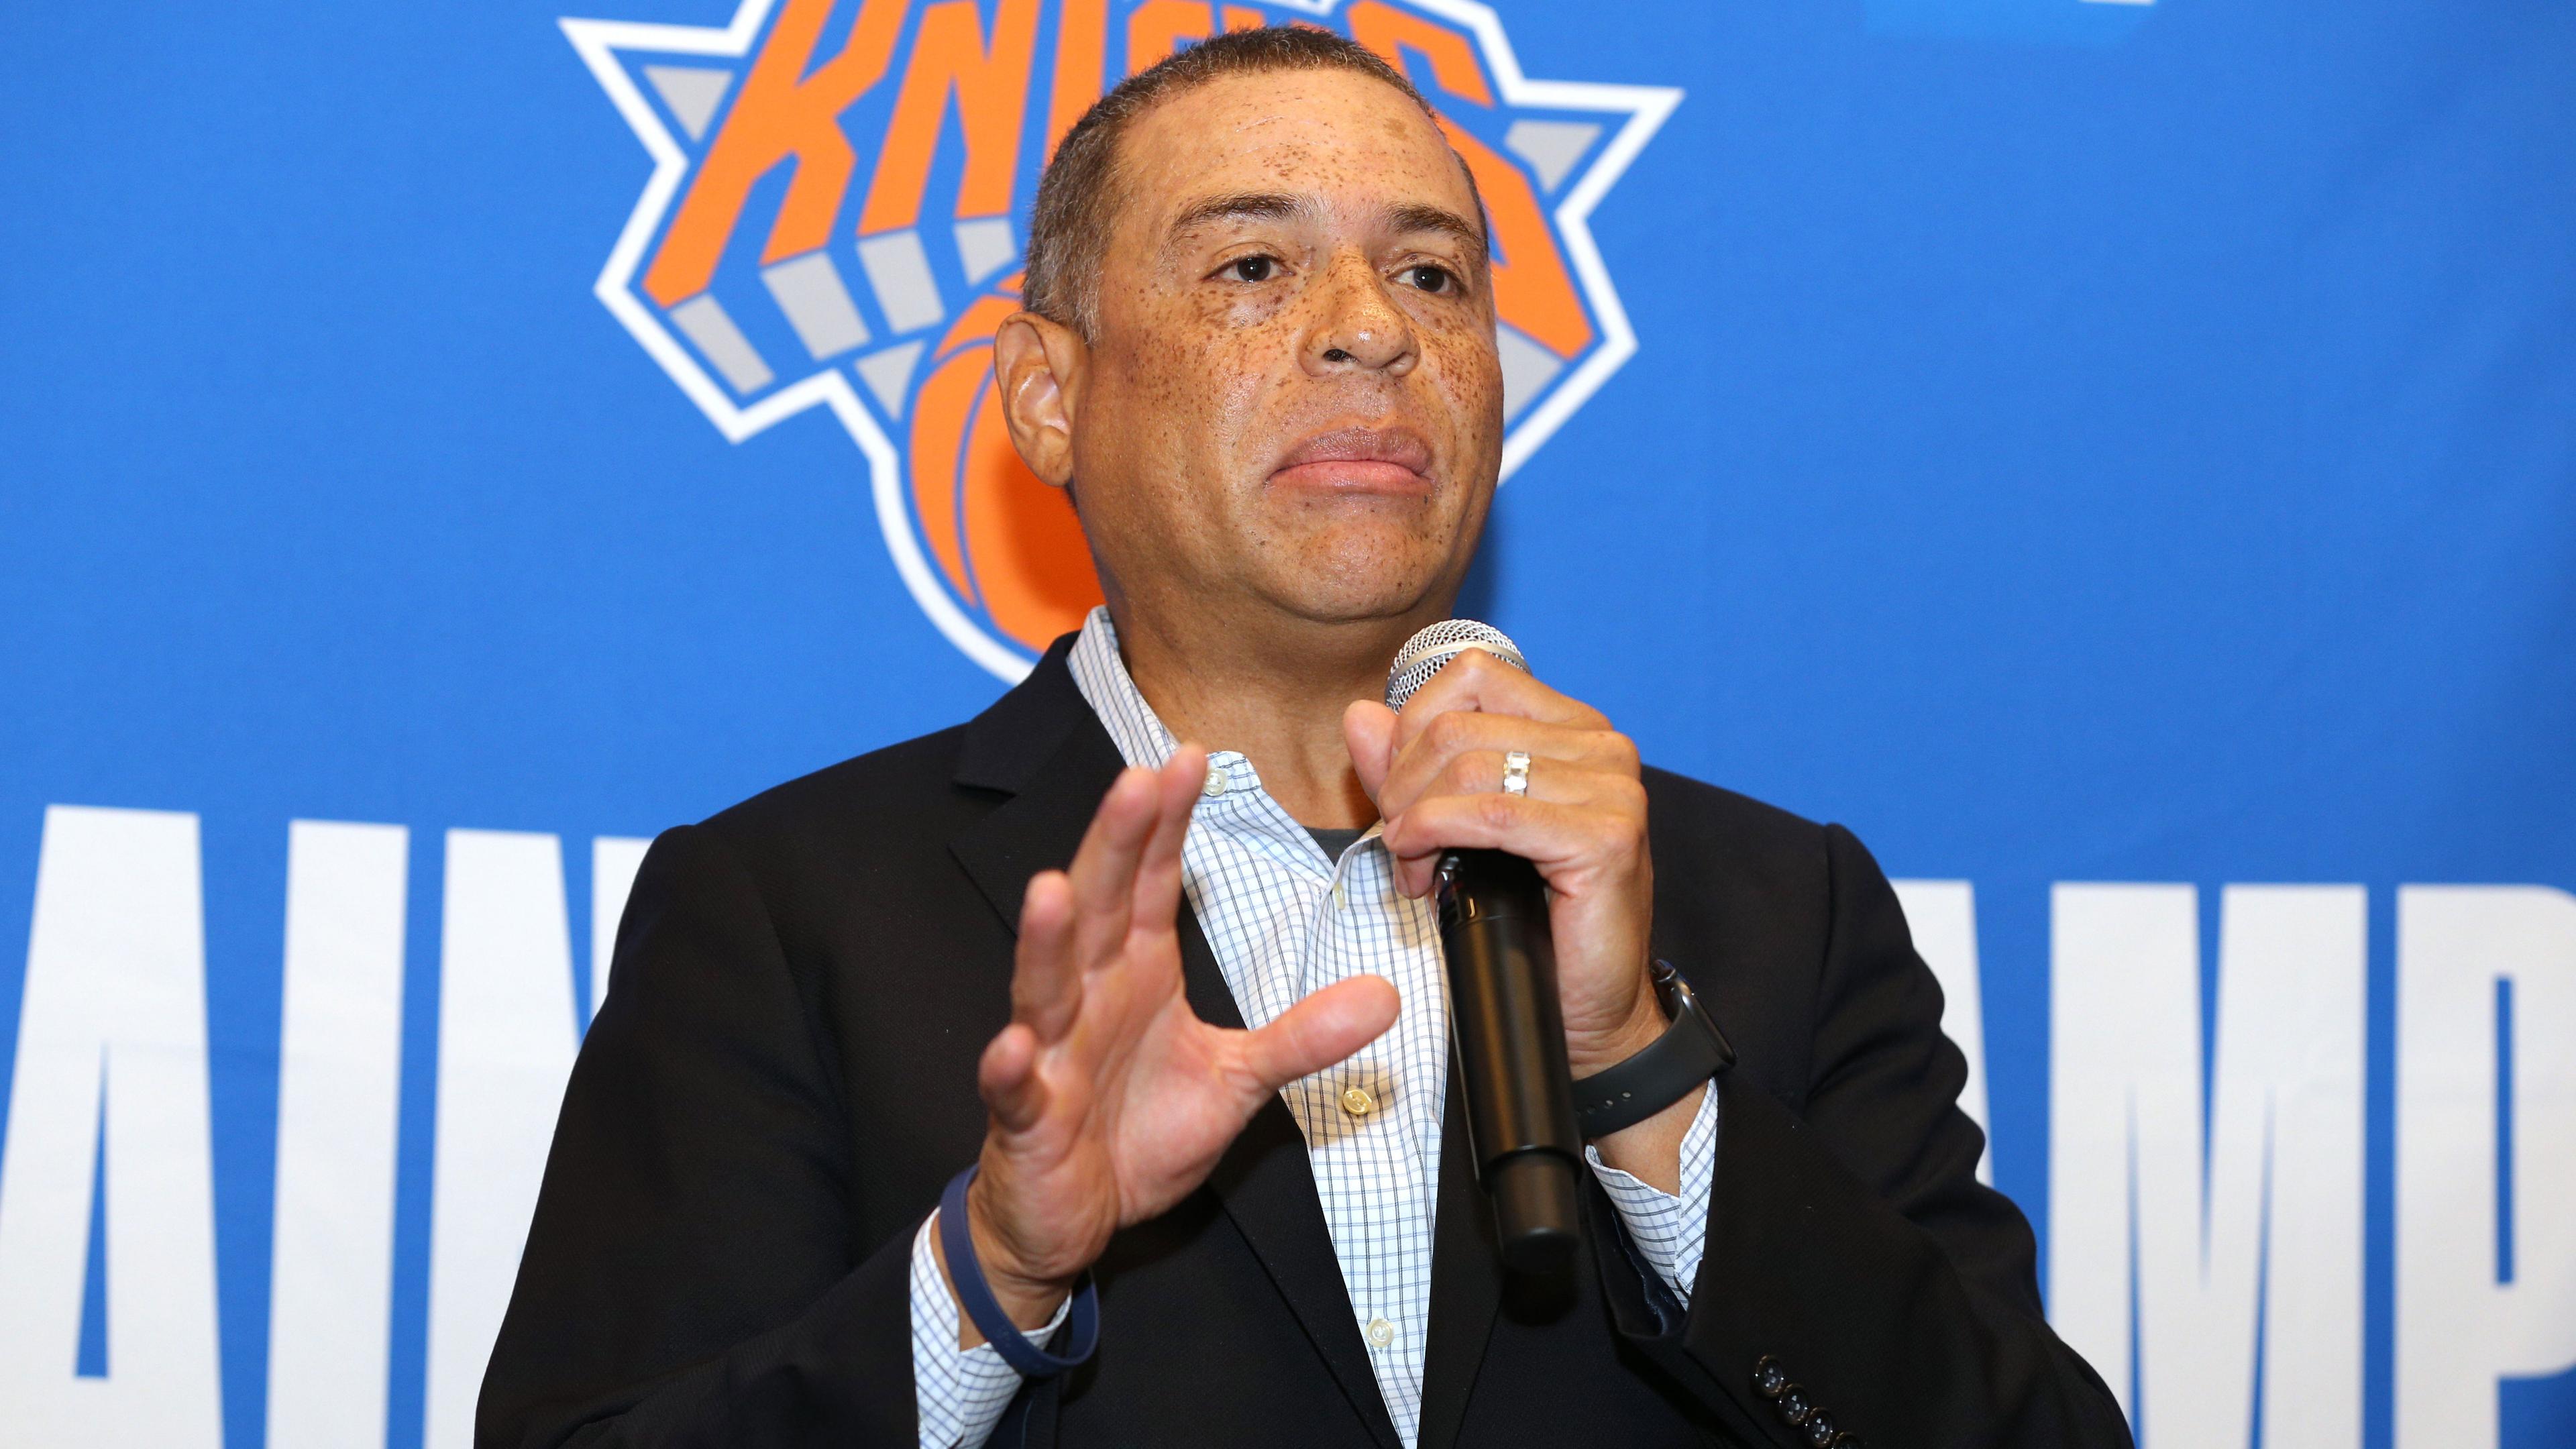 Sep 30, 2019; New York, NY, USA; New York Knicks general manager Scott Perry speaks to the media during media day at the MSG training center in Greenburgh, NY. / Brad Penner-USA TODAY Sports